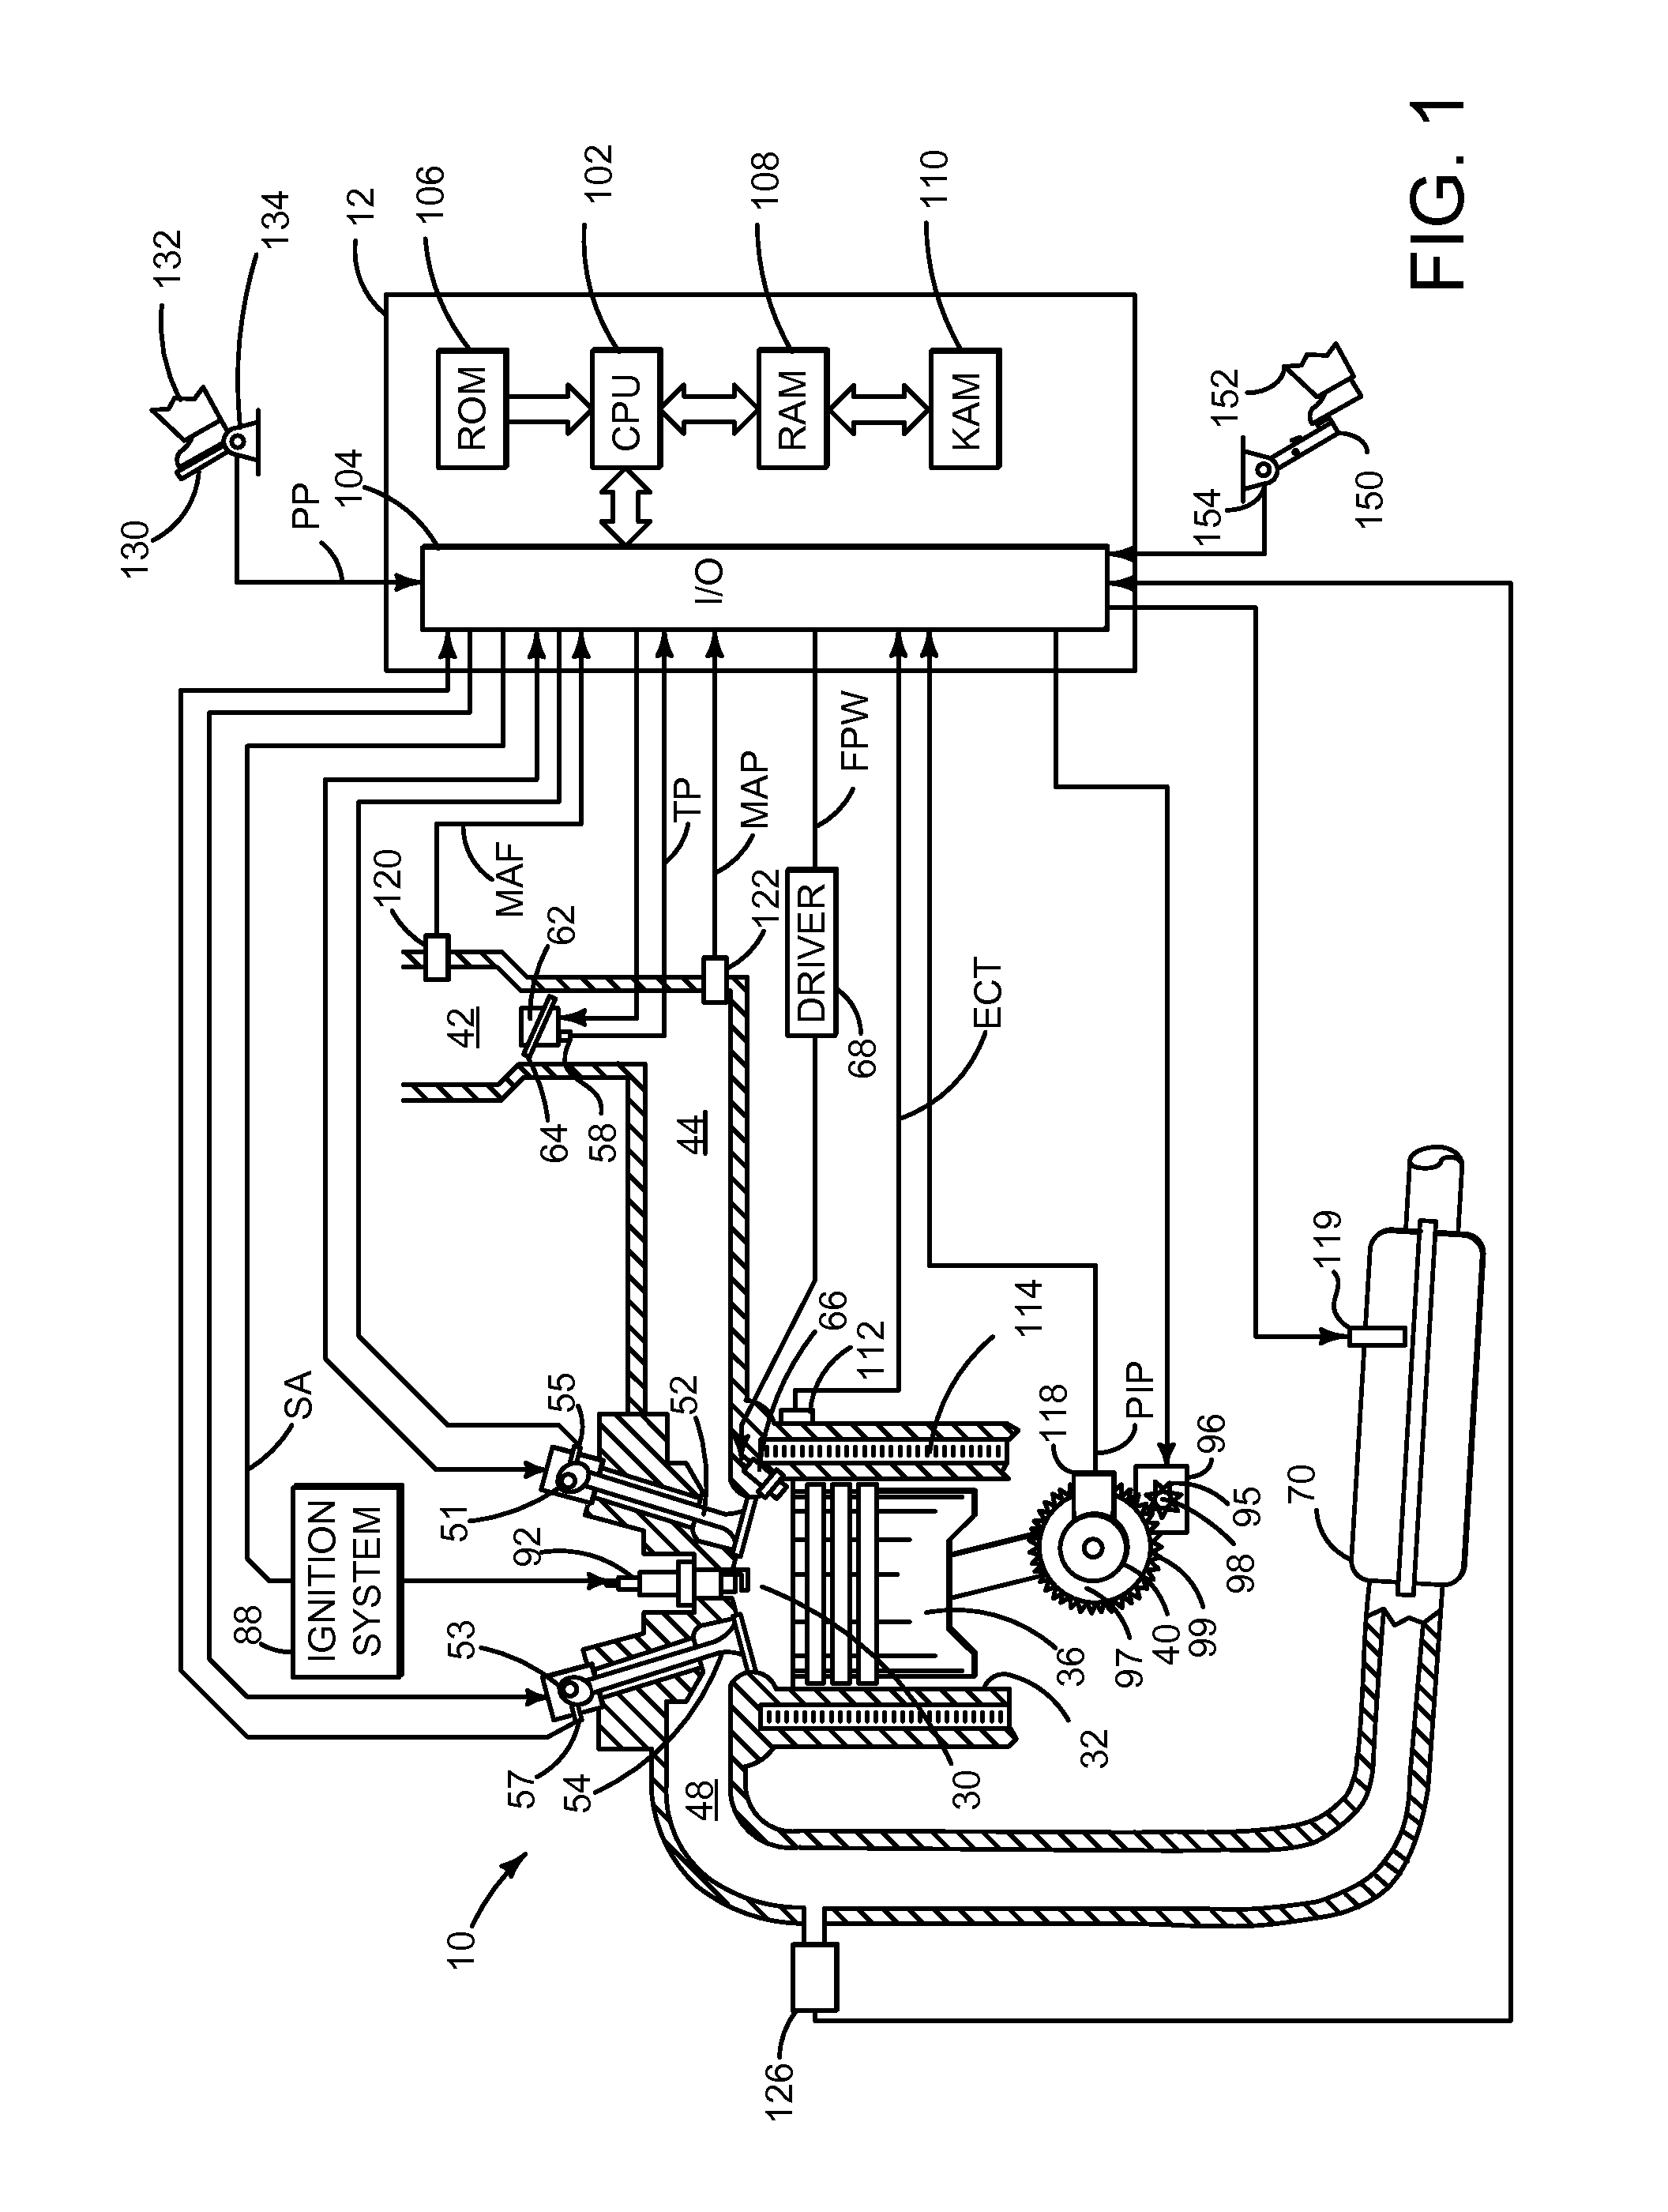 Methods and systems for reducing gear lash noise